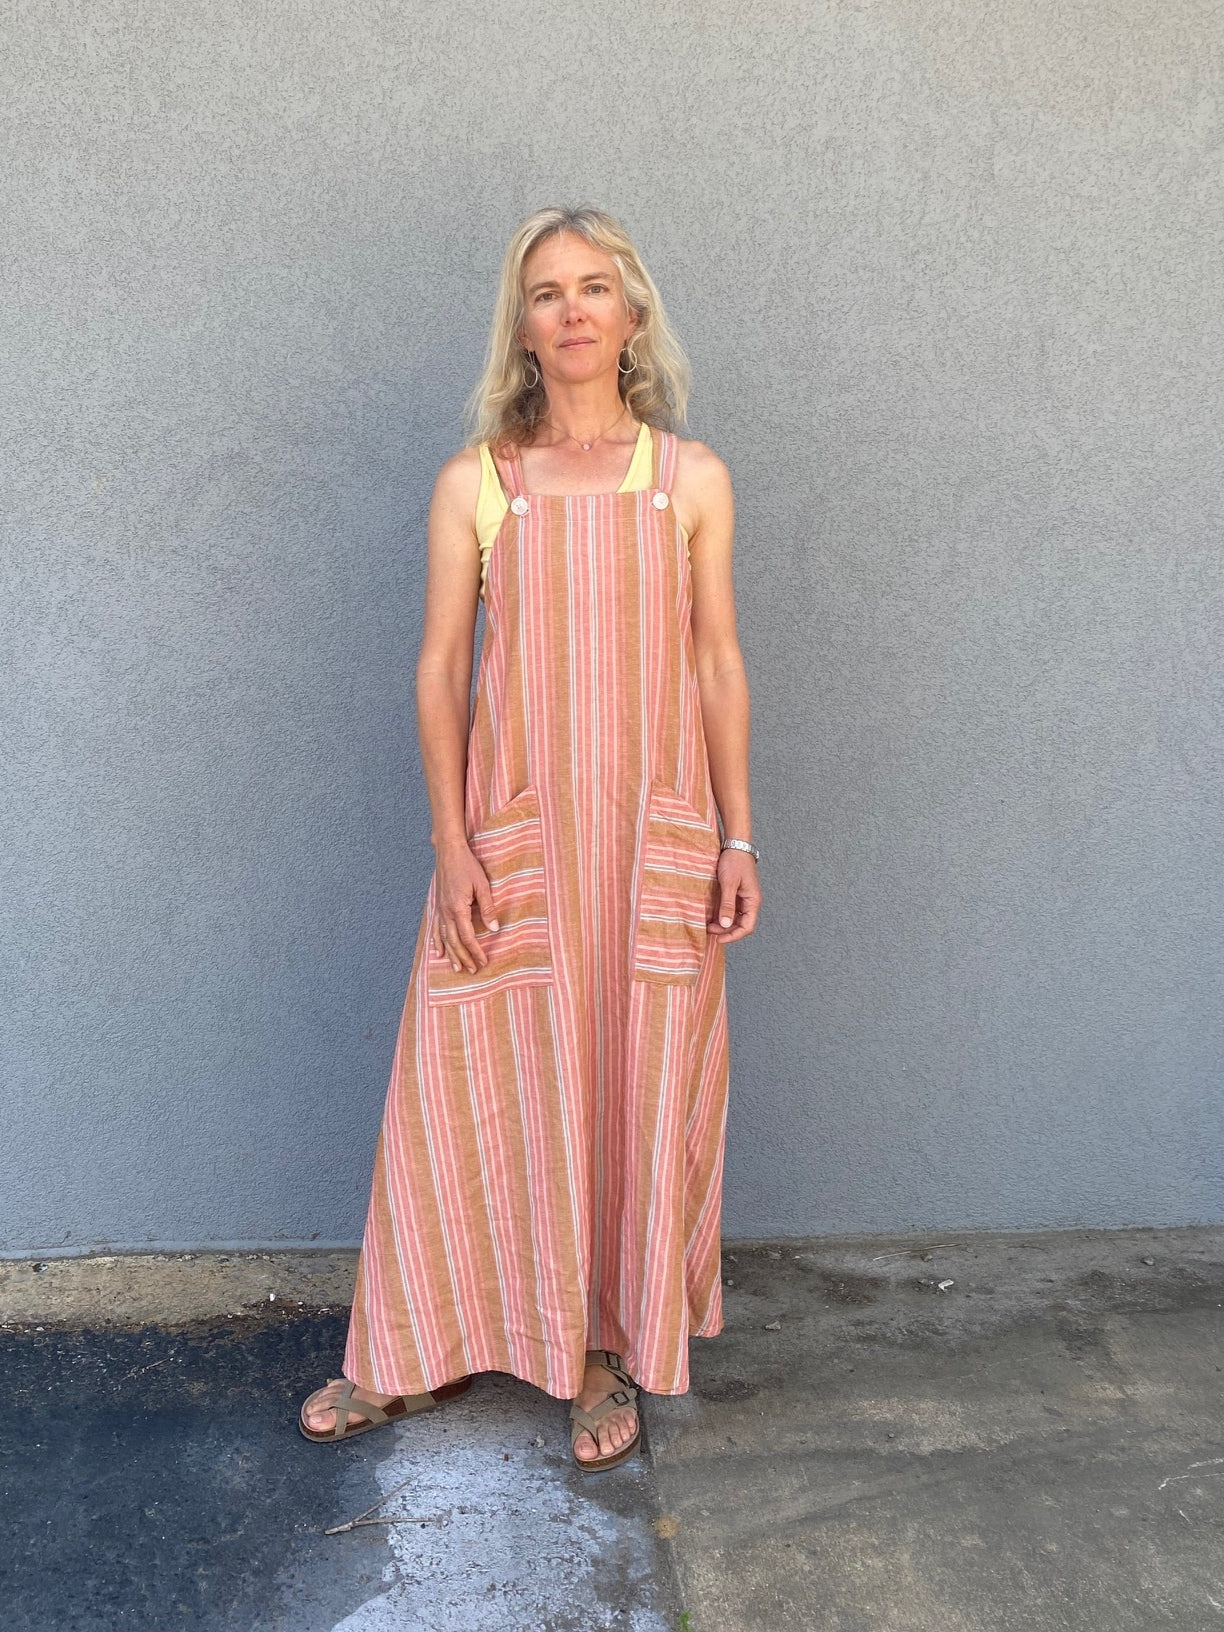 woman standing in front of a grey wall wearing a peach colored striped long pinafore dress